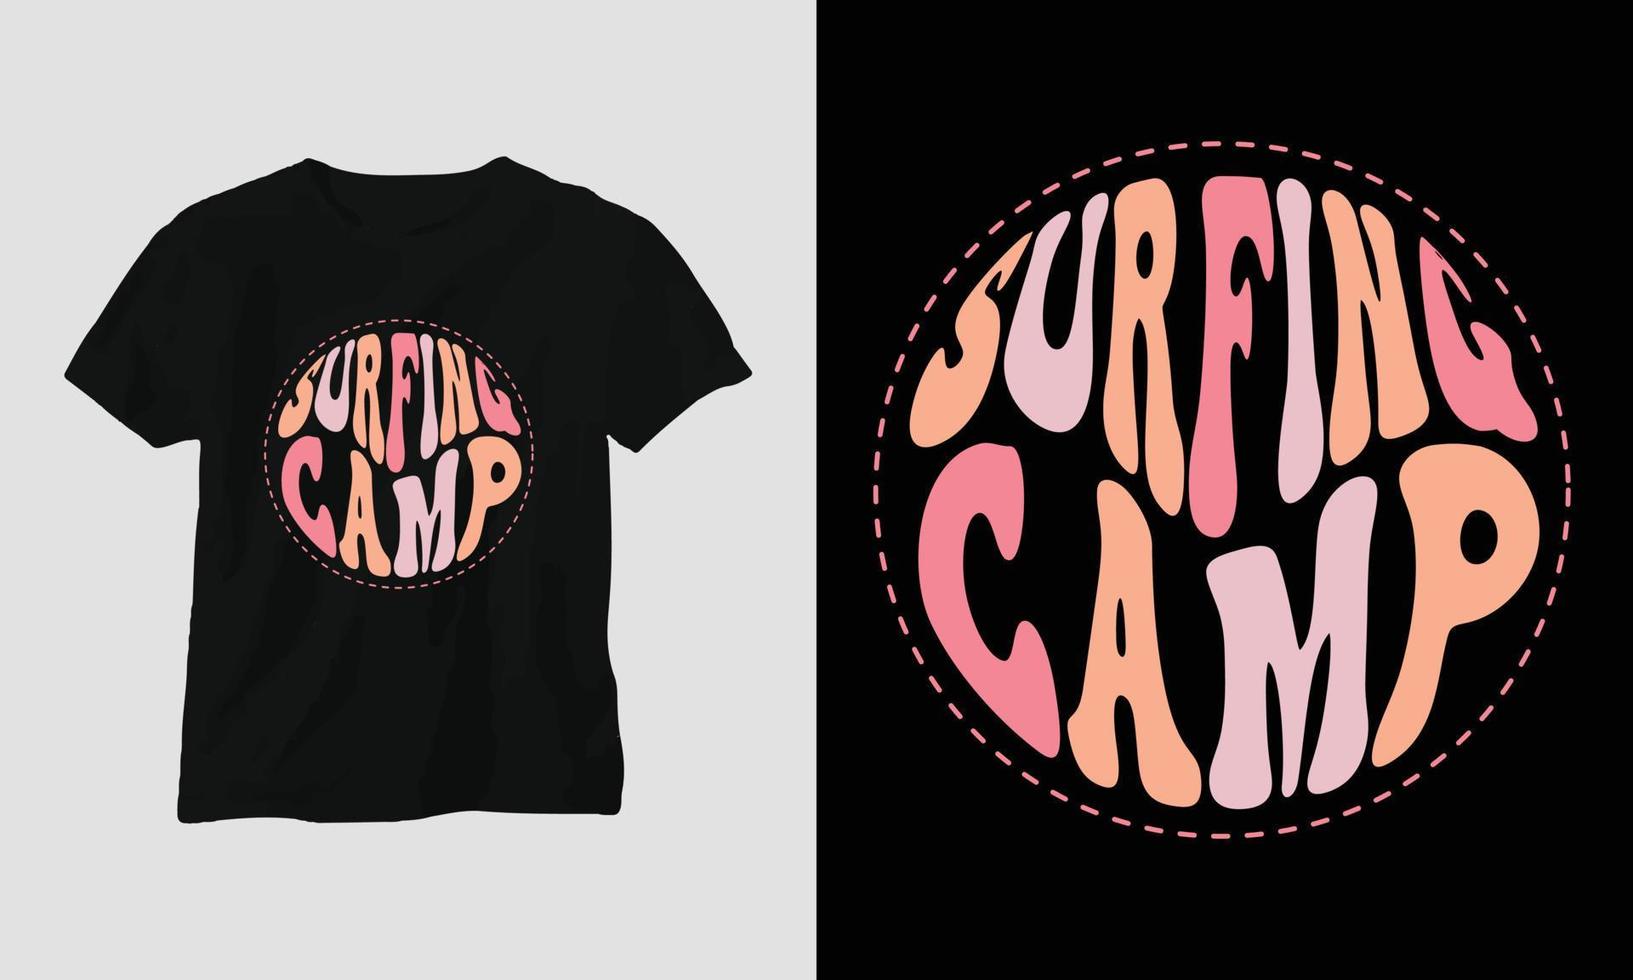 Surfing camp - Surfing Groovy T-shirt Design Retro Style vector